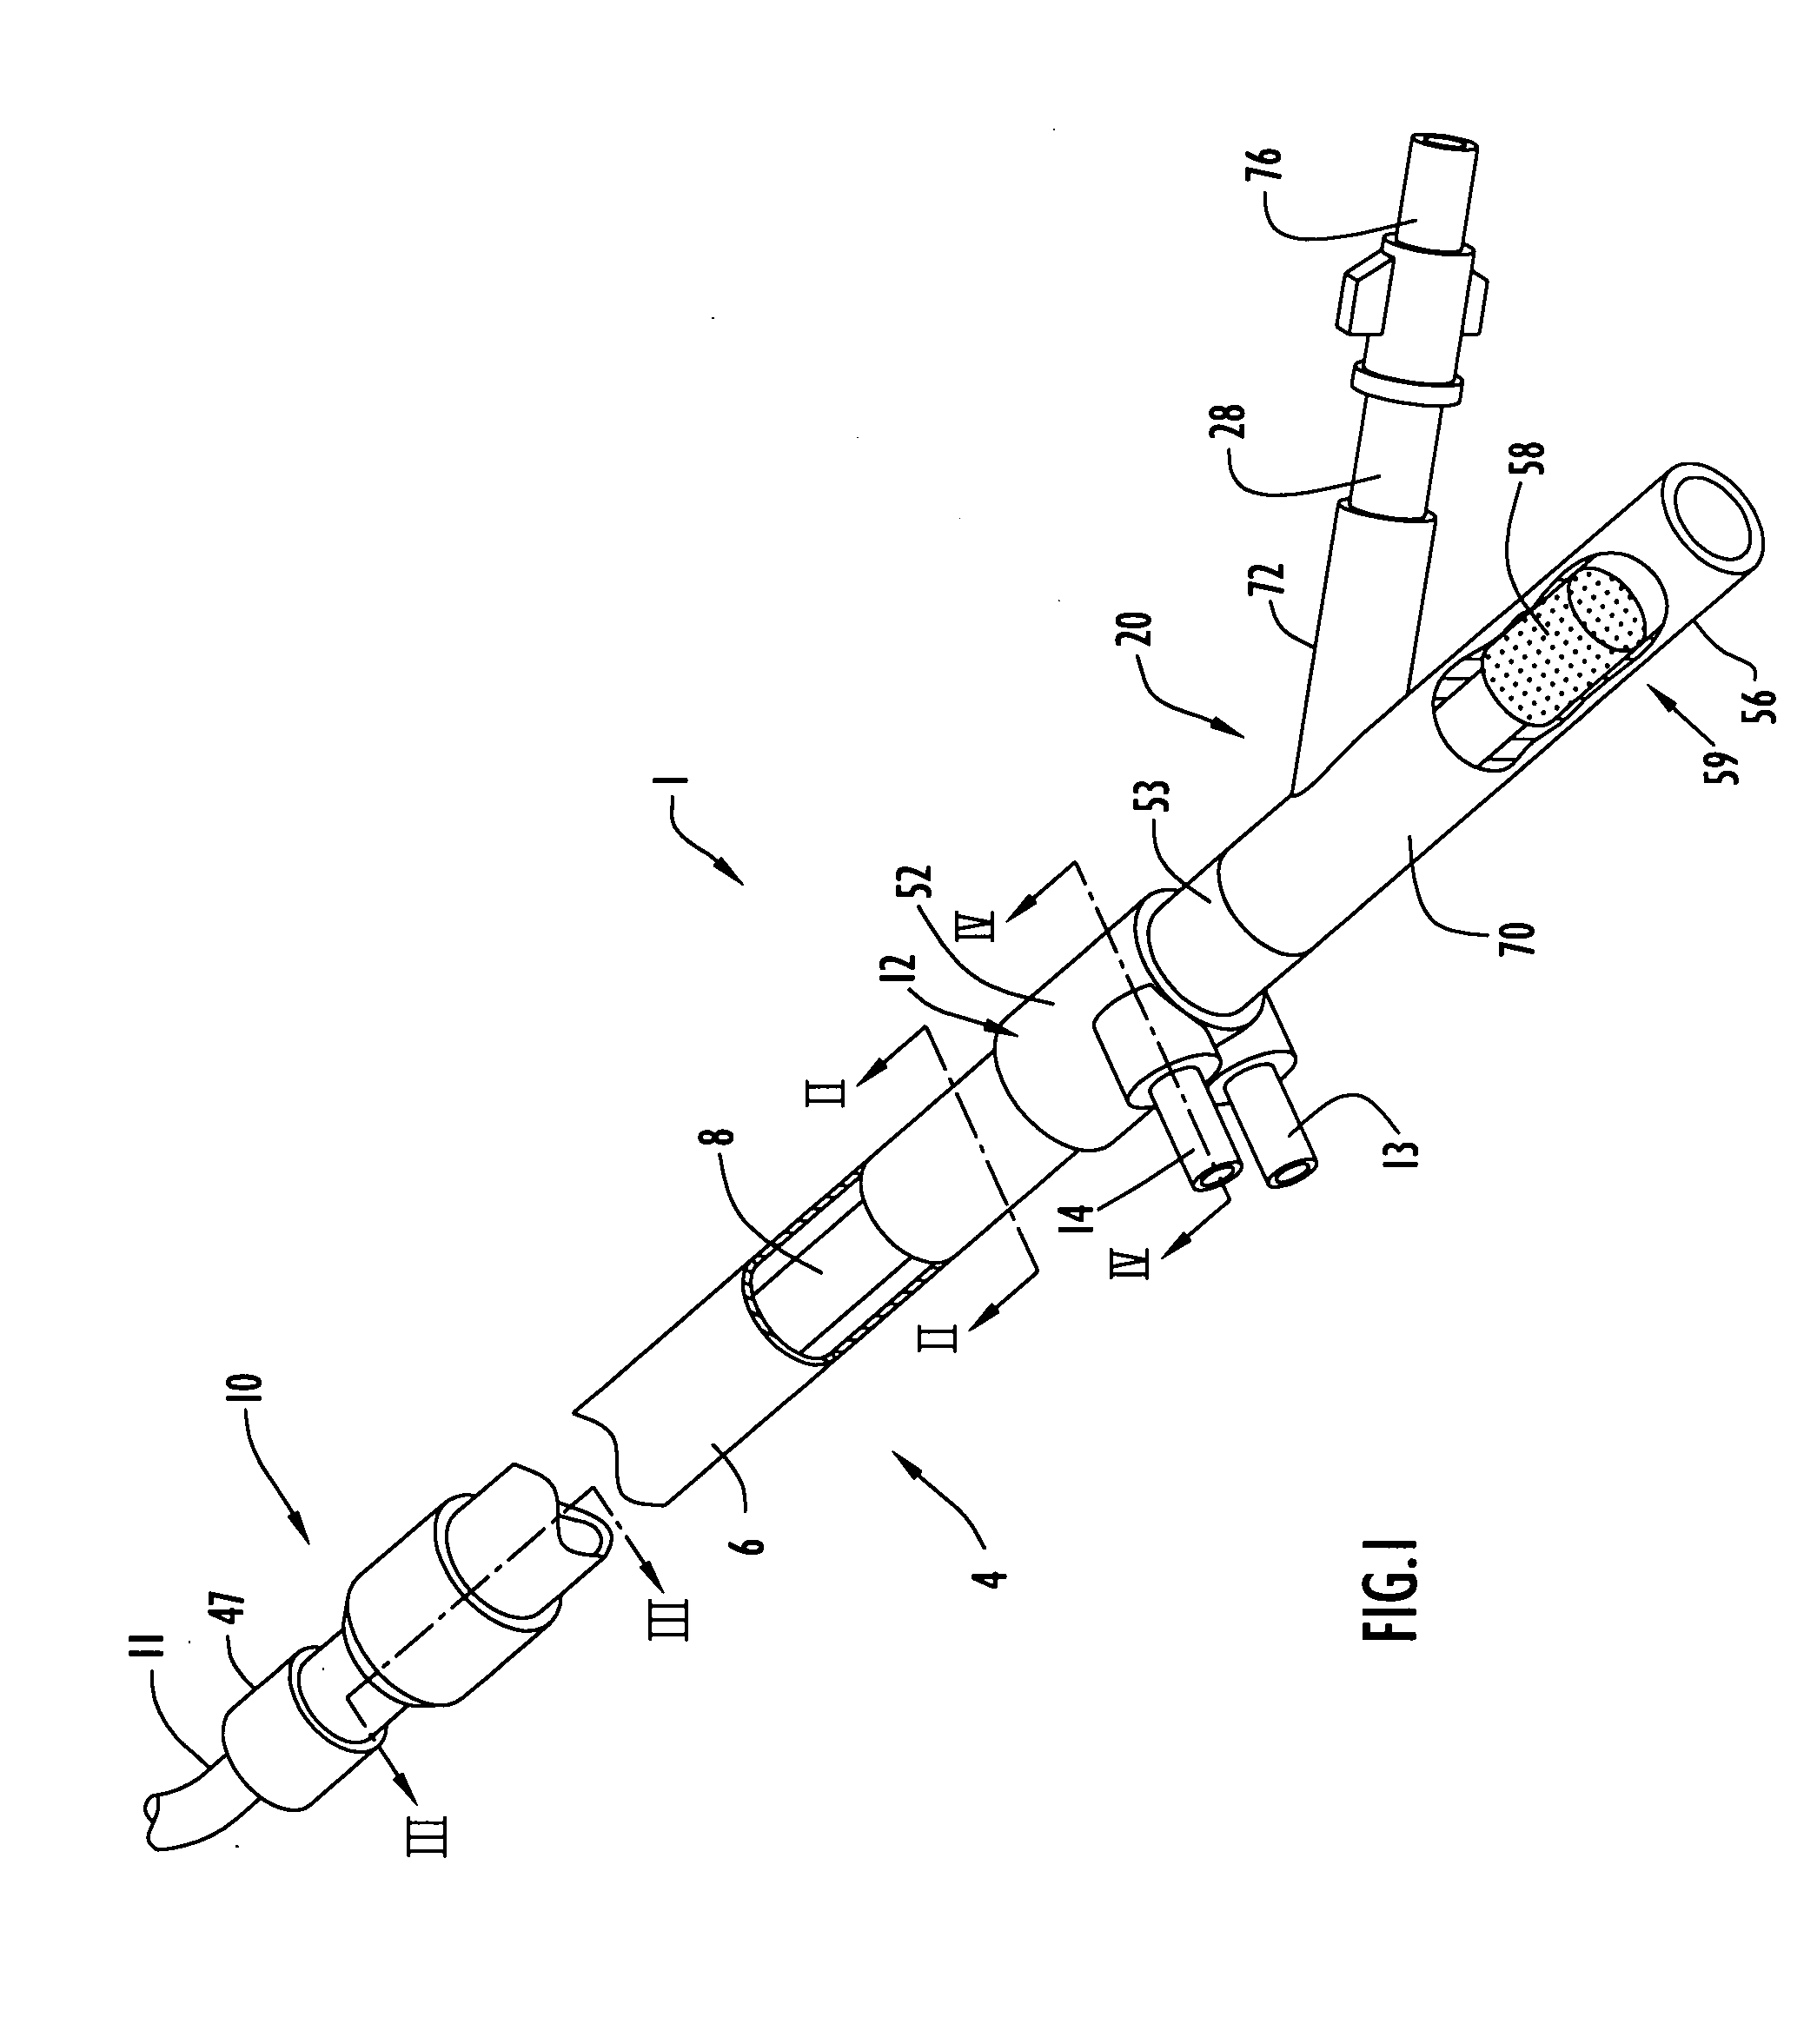 Method and apparatus for facilitating injection of medication into an intravenous fluid line while maintaining sterility of infused fluids